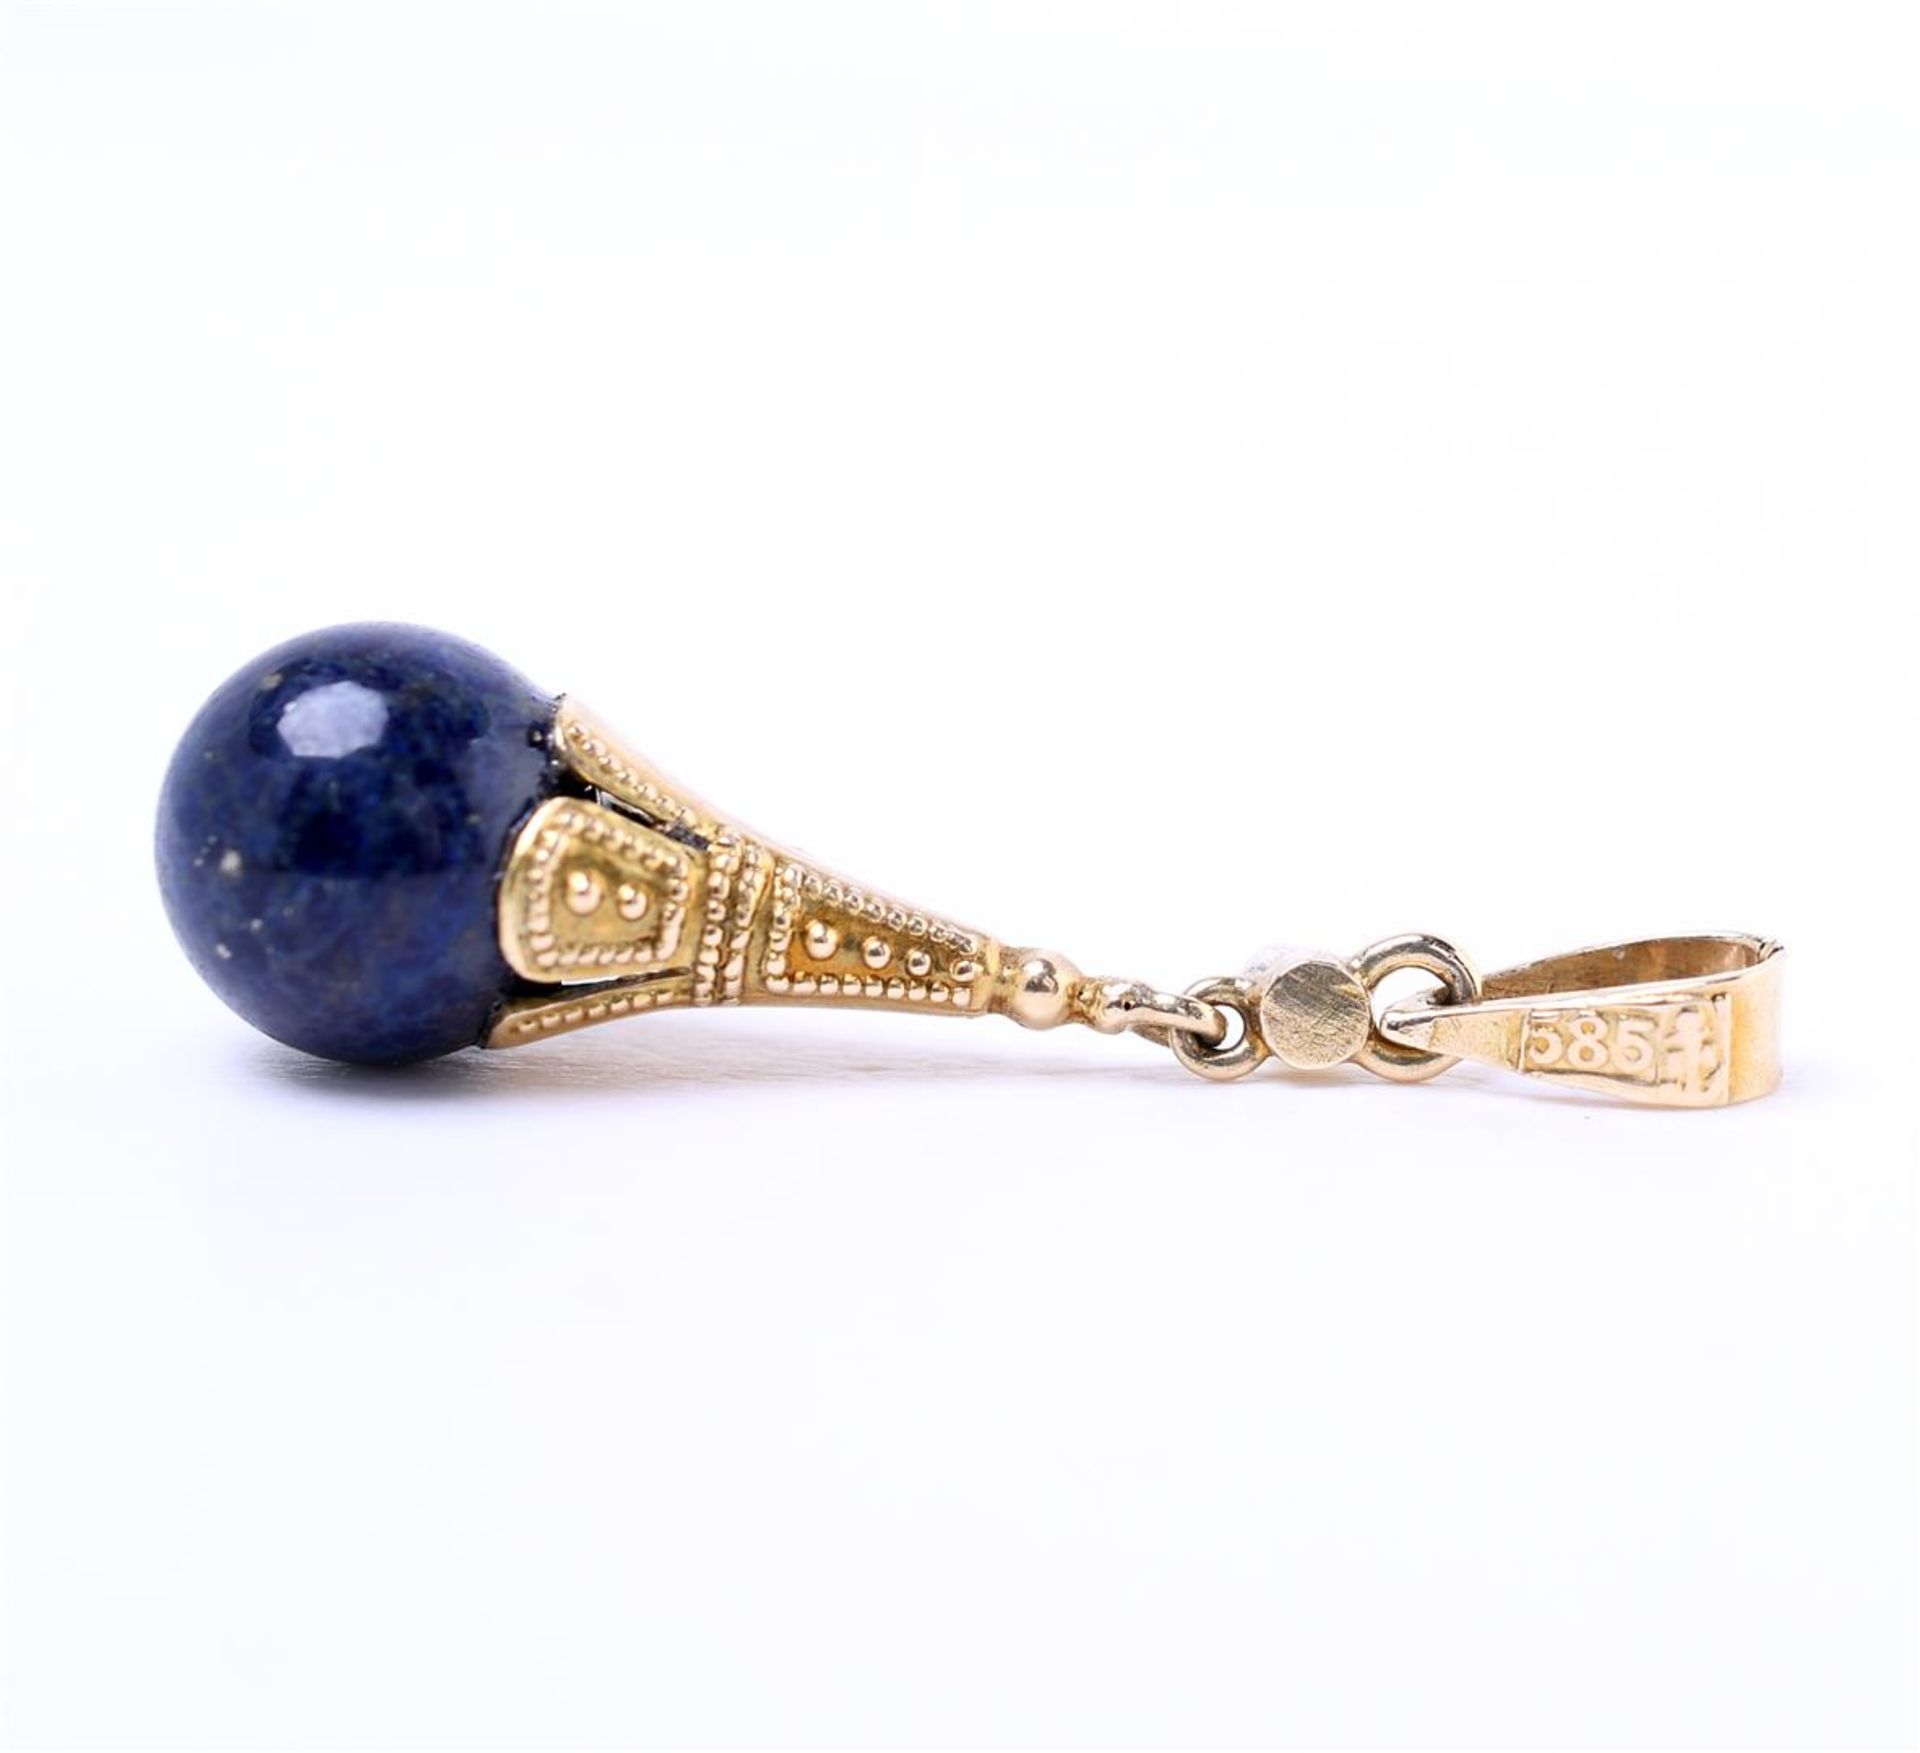 14kt yellow gold pendant set with lapis and freshwater pearl. Pendant weight: 1.2 grams - Image 3 of 3